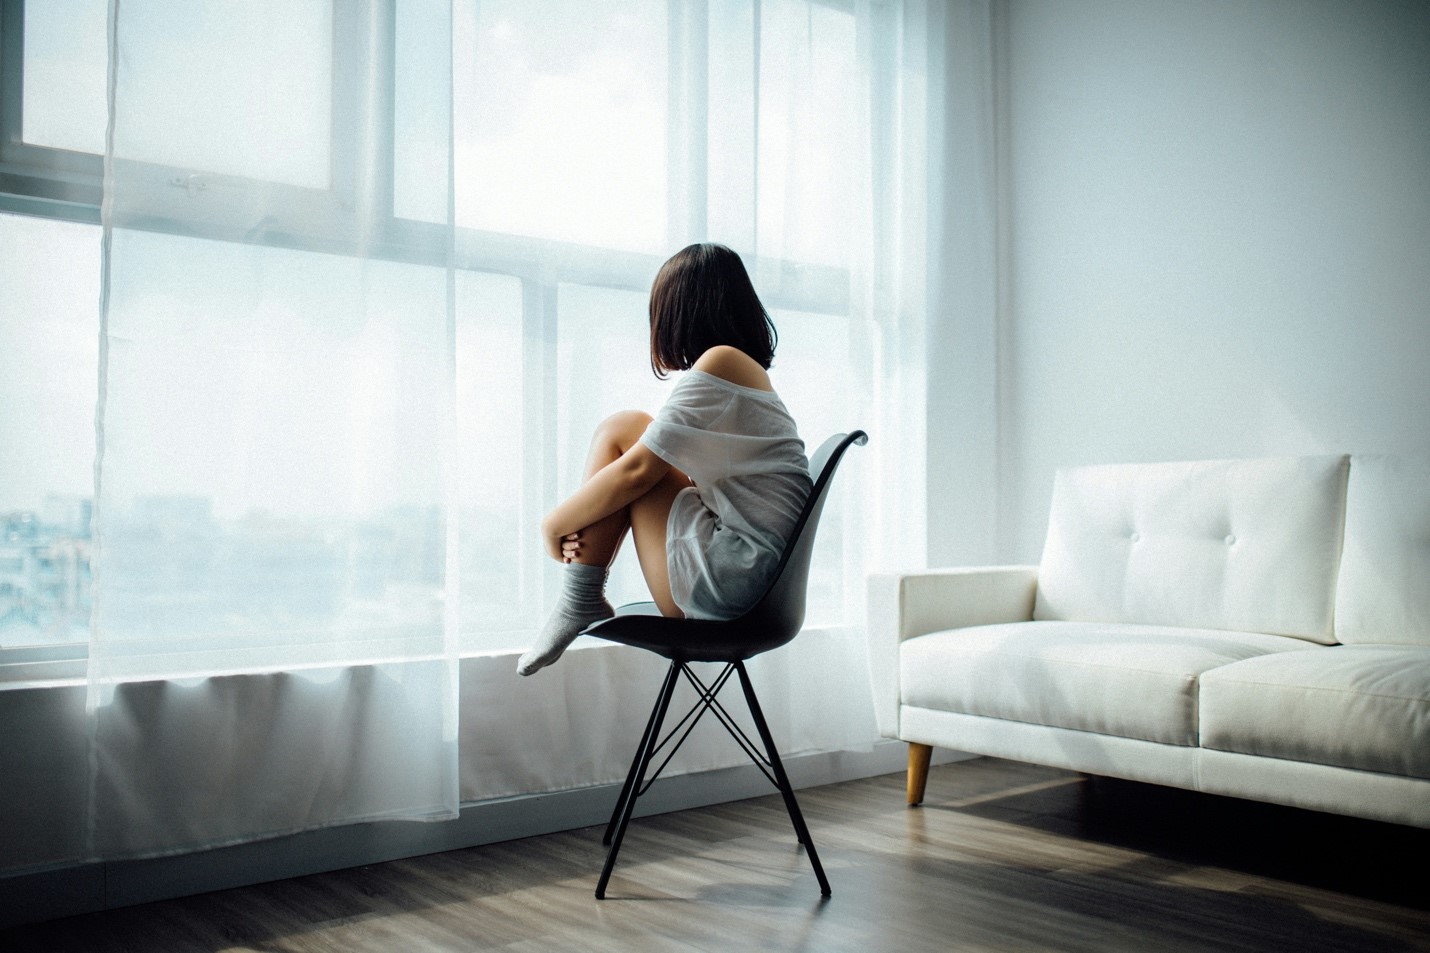 Image on lone woman sitting in a chair facing a window